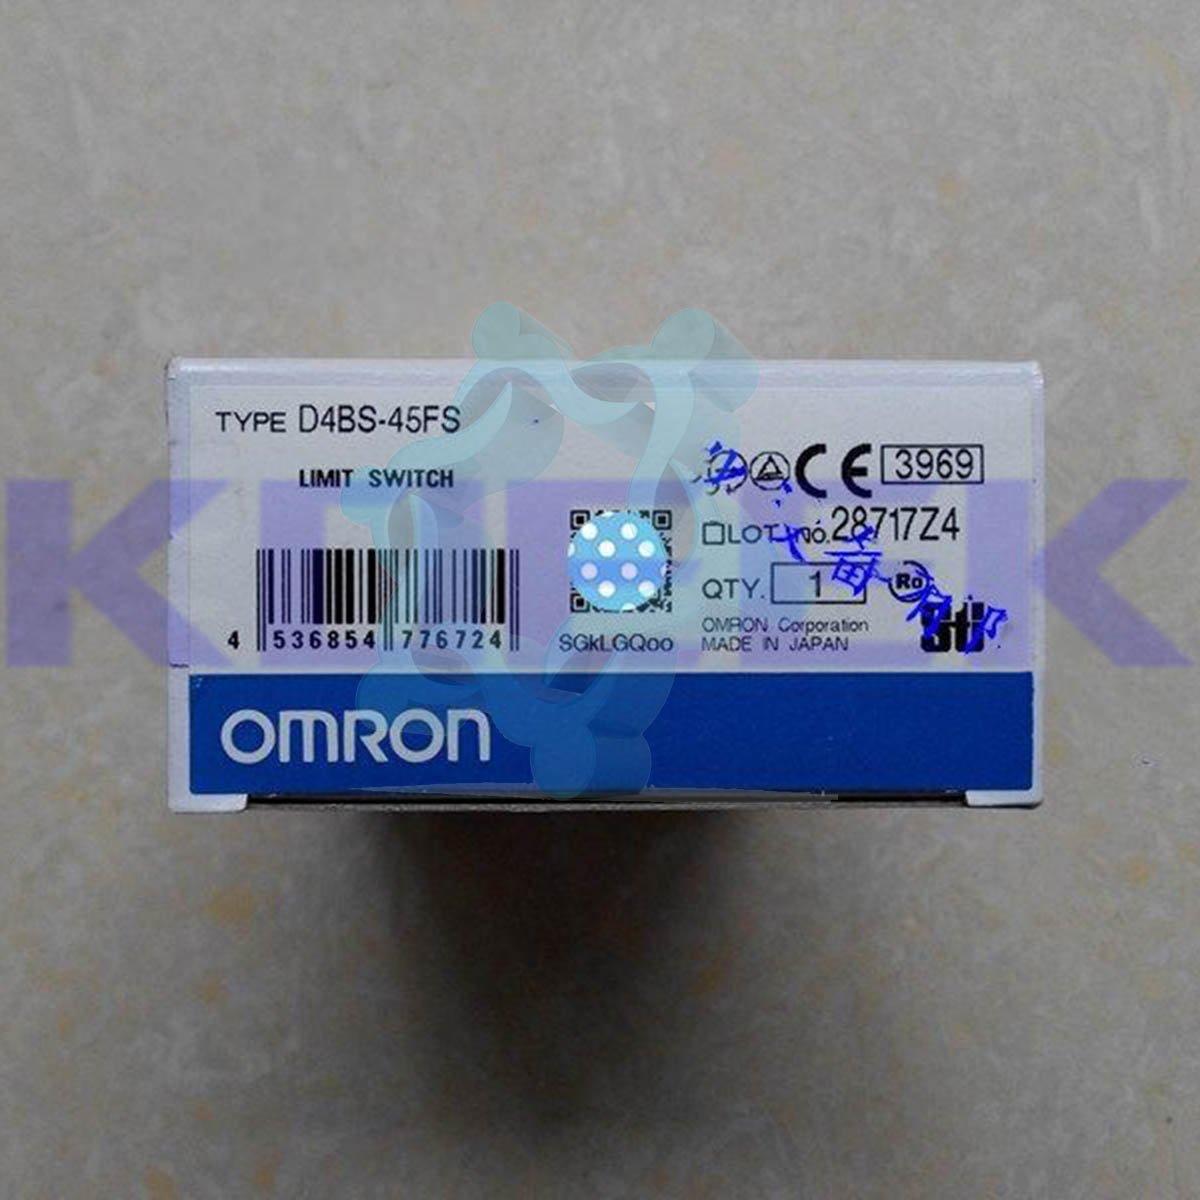 D4BS-45FS KOEED 101-200, 80%, import_2020_10_10_031751, Omron, Other